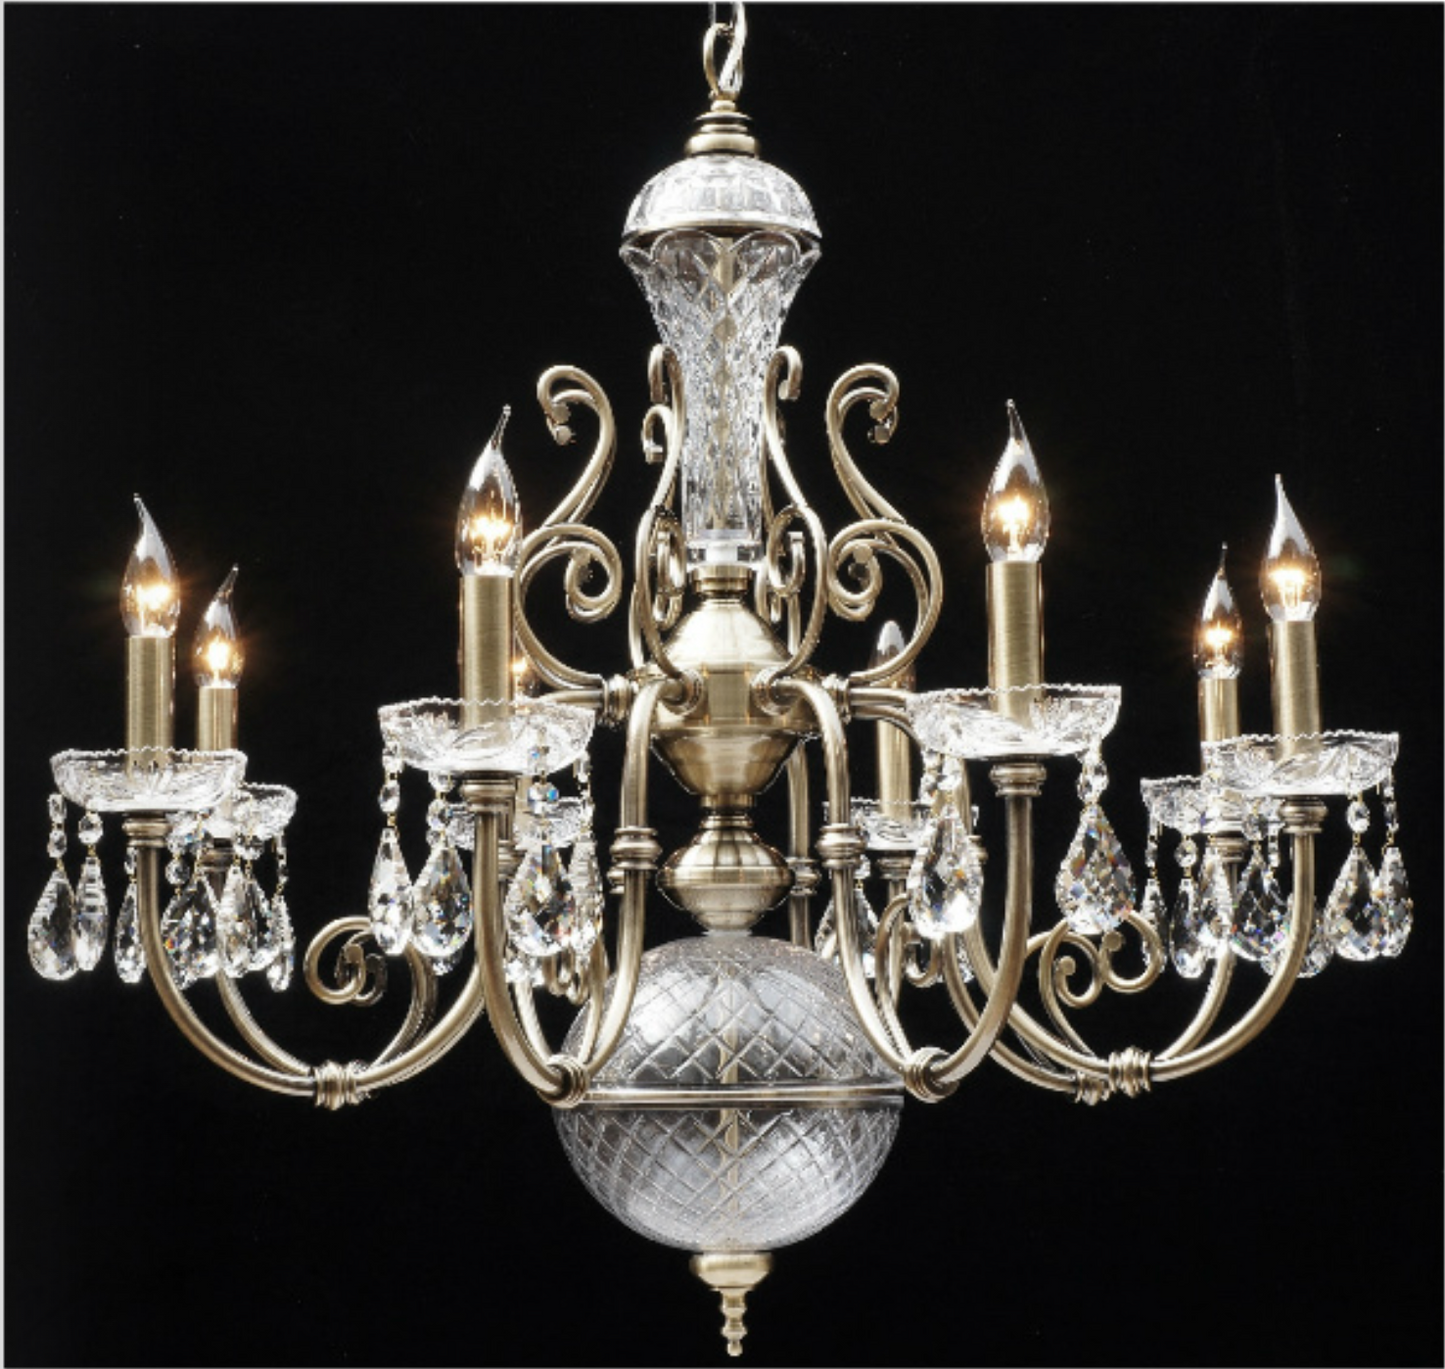 REM 8 Arm Antique Brass Chandelier With Glass & Crystal Detail - ID 11512